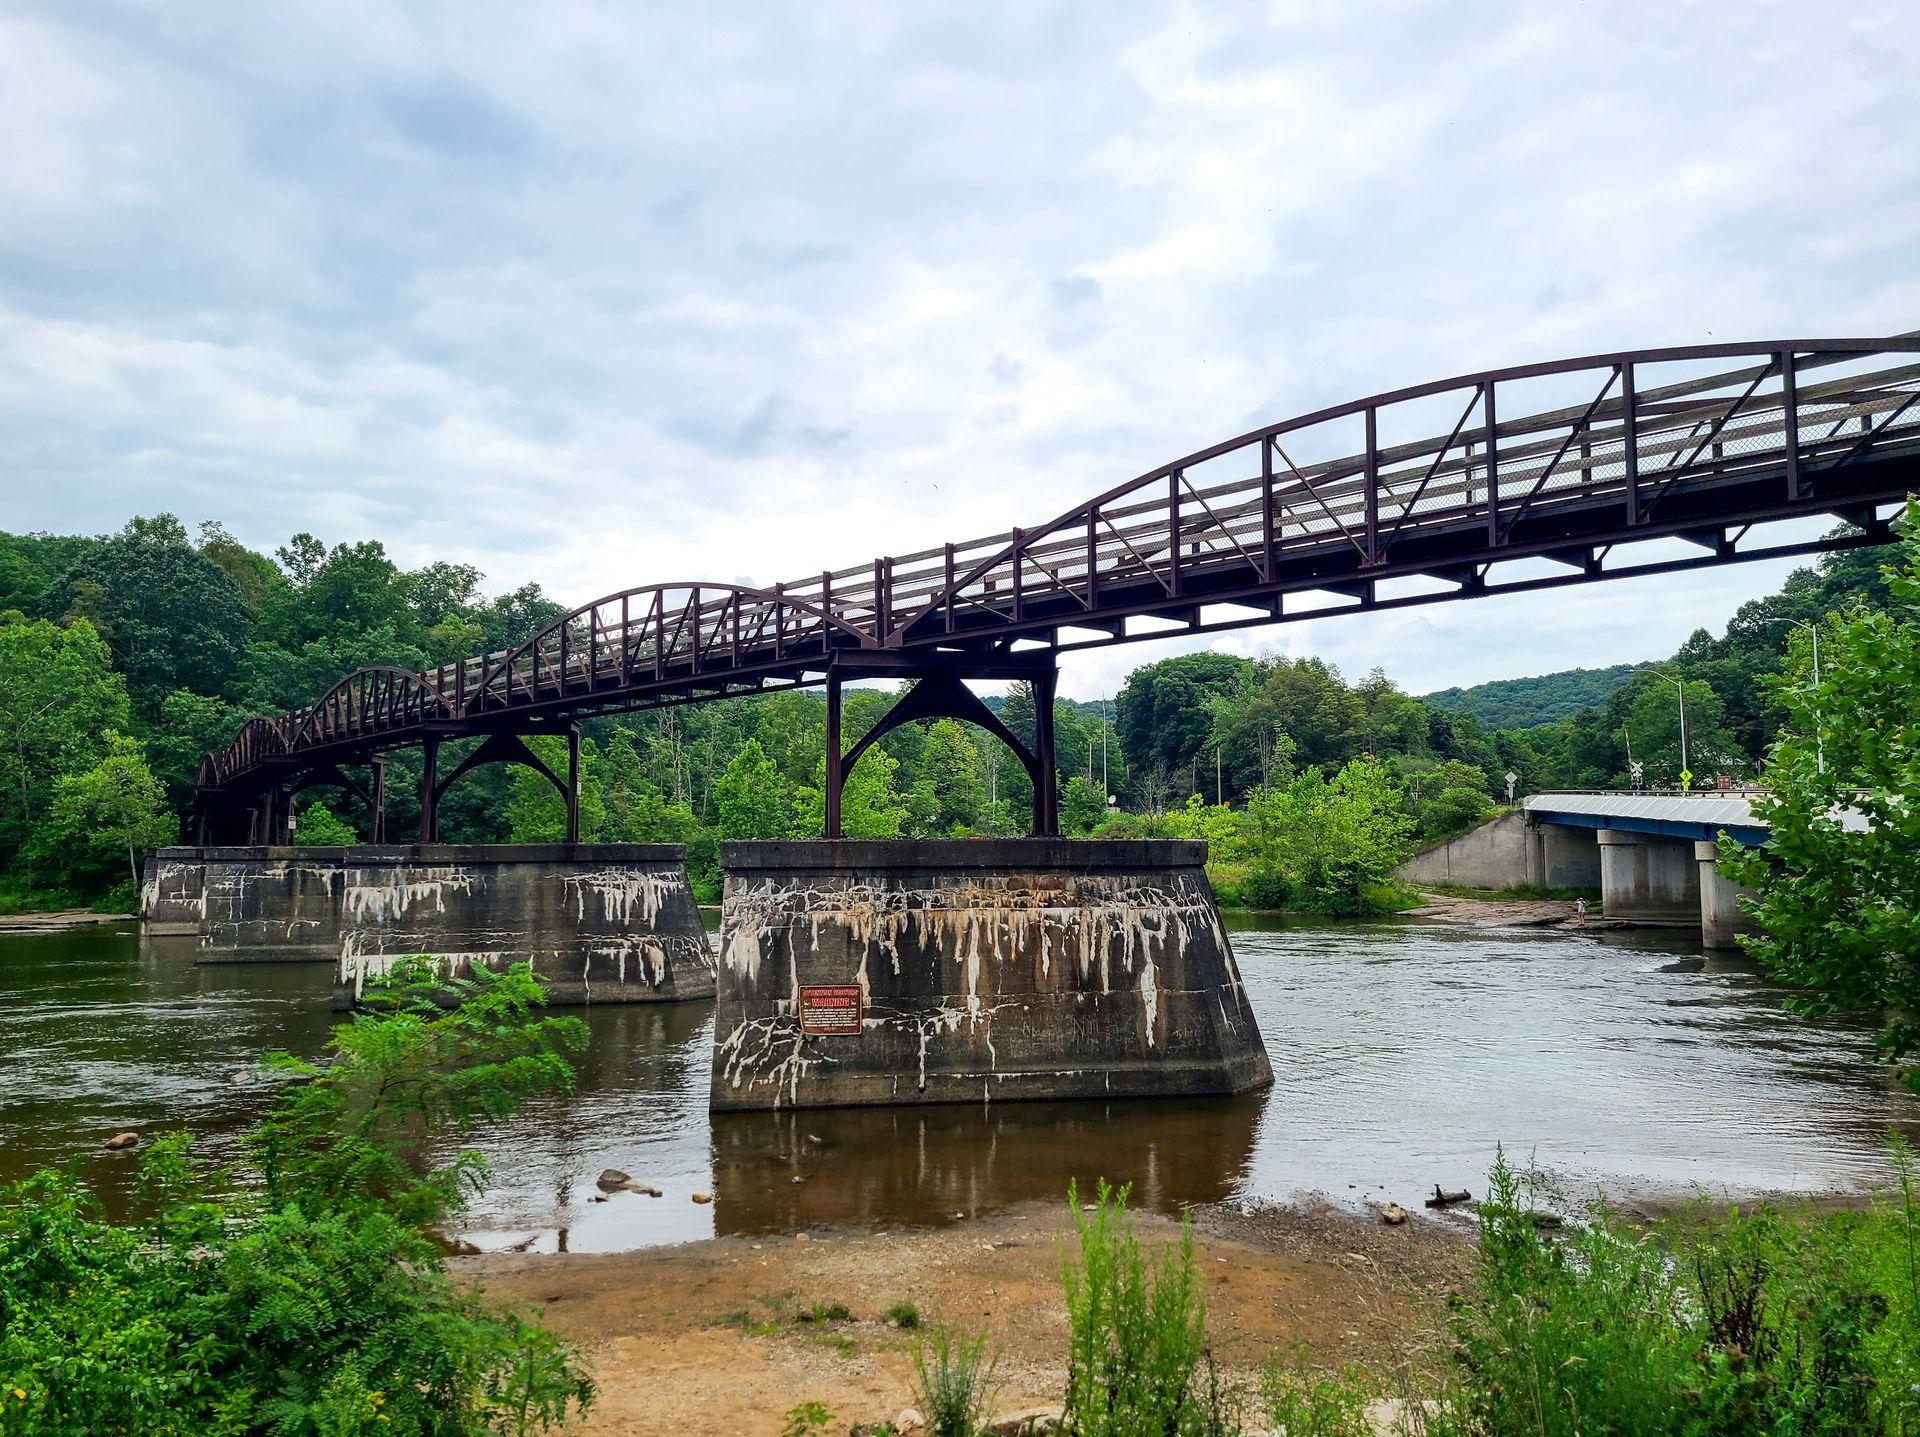 A bike and walking bridge raised over the Youghiogheny River in downtown Ohiopyle.